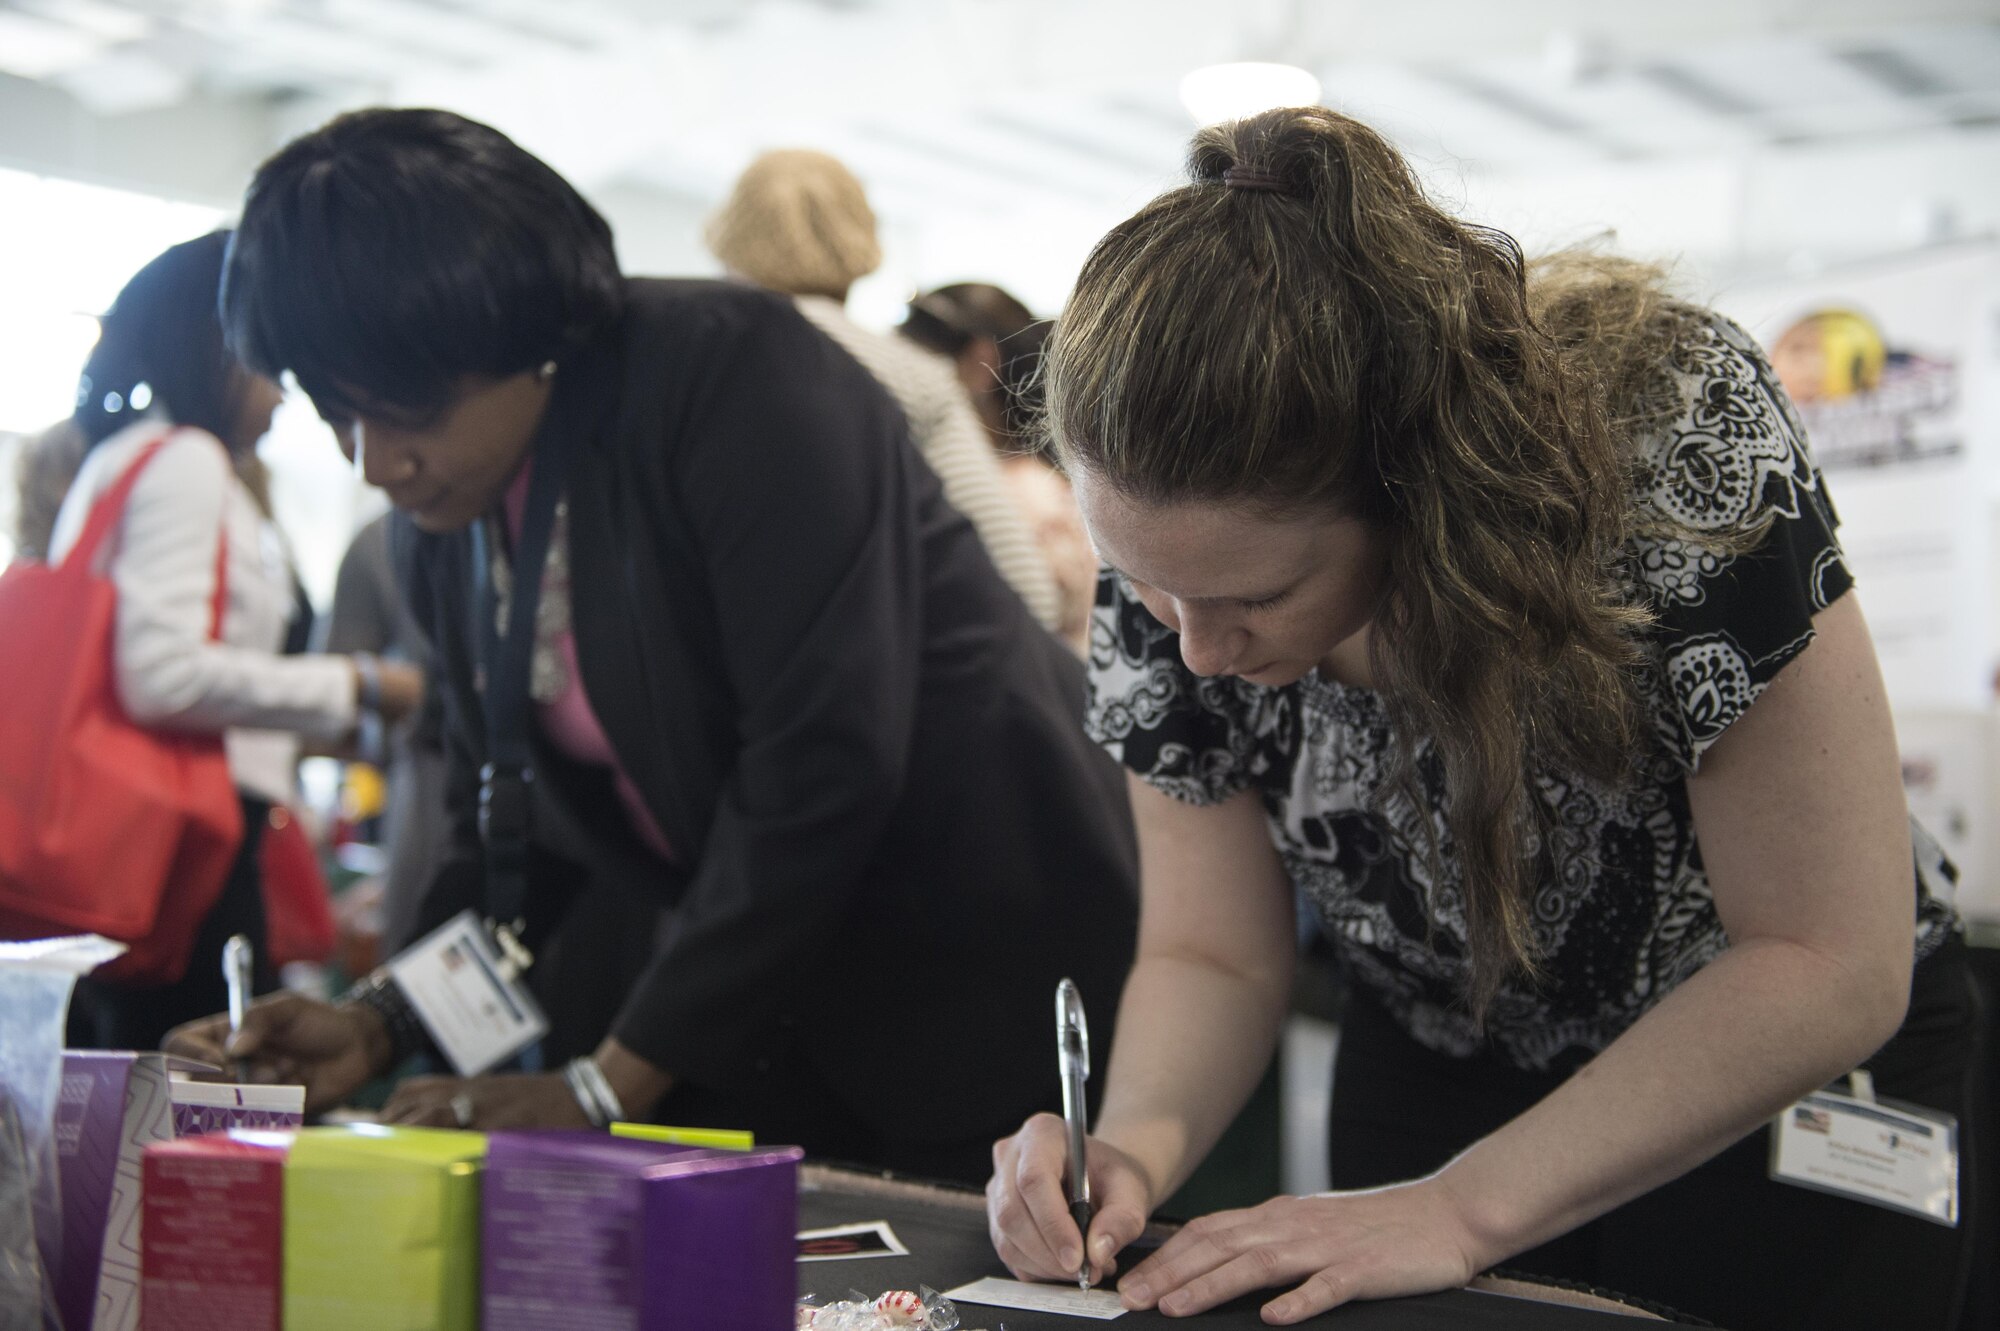 Tech. Sgt. Erica Sherwood, 434th Force Support Squadron NCOIC, and Senior Master Sgt. Linda Mason-Wilson, 434th Operational Support Squadron first sergeant, fill out cards to win cosmetics during the 2016 Indiana Woman Veterans’ Conference in Indianapolis, April 15, 2016. During the event participants visited a variety of workshops and stations setup to provide information and benefits.  (U.S. Air Force photo/Tech. Sgt. Benjamin Mota)